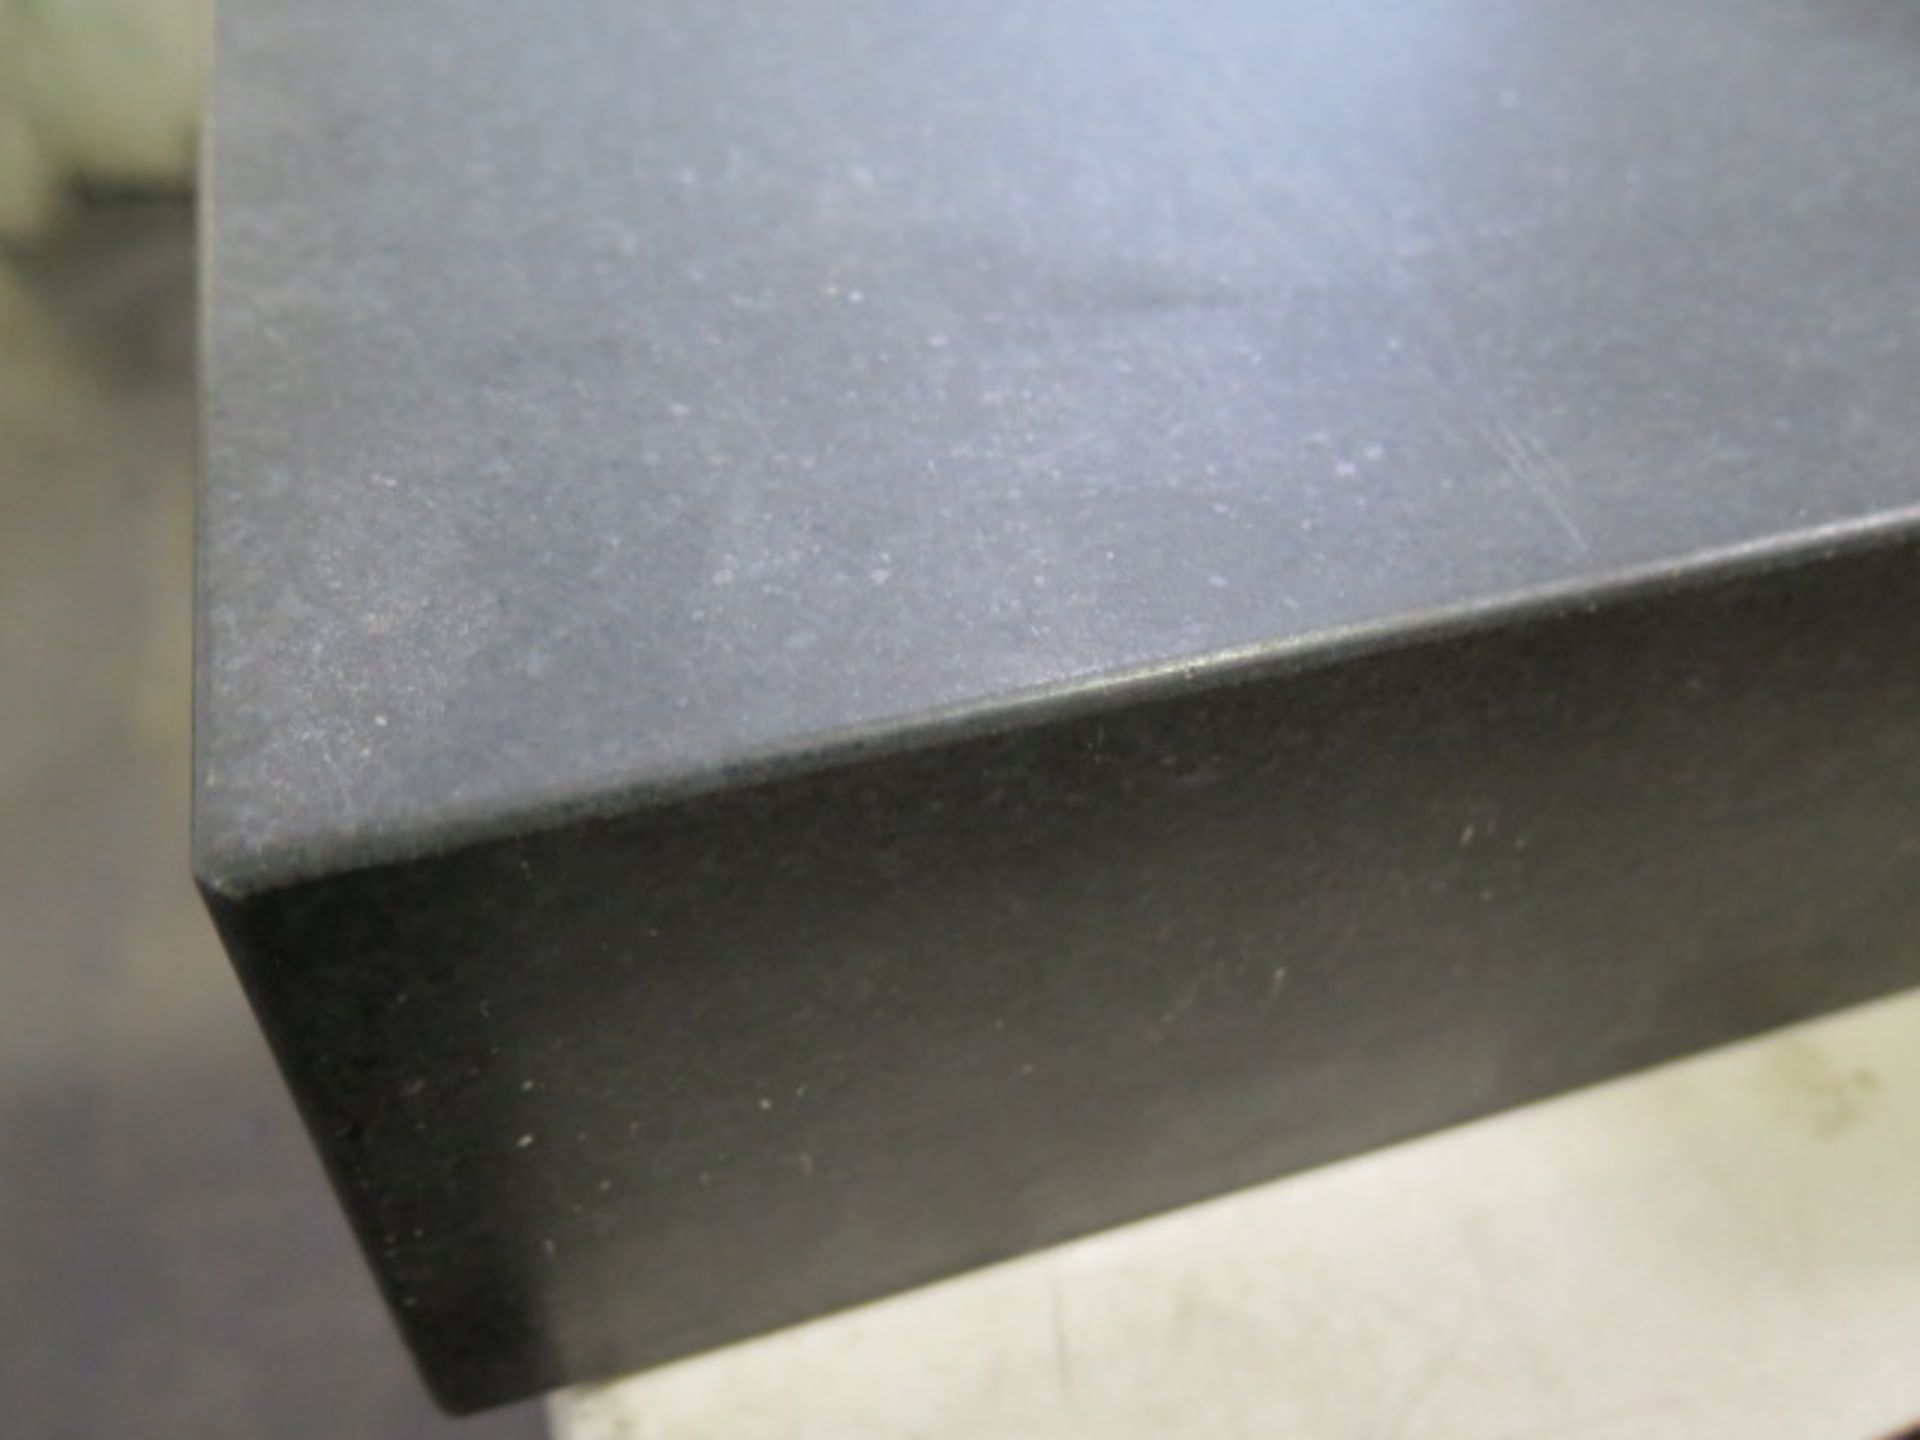 12" x 18" x 3" Granite Surface Plate (SOLD AS-IS - NO WARRANTY) - Image 4 of 4